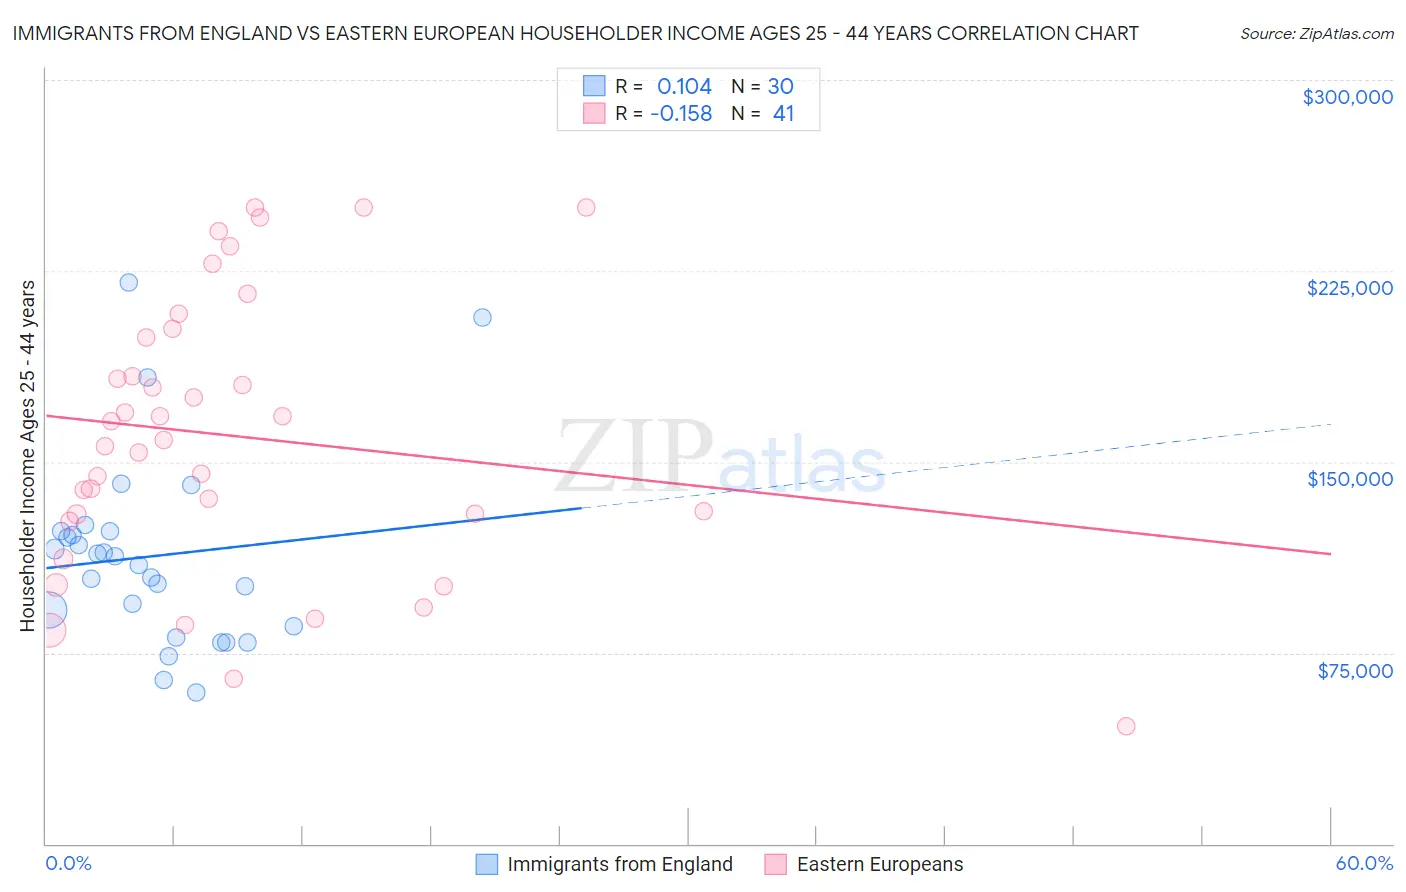 Immigrants from England vs Eastern European Householder Income Ages 25 - 44 years